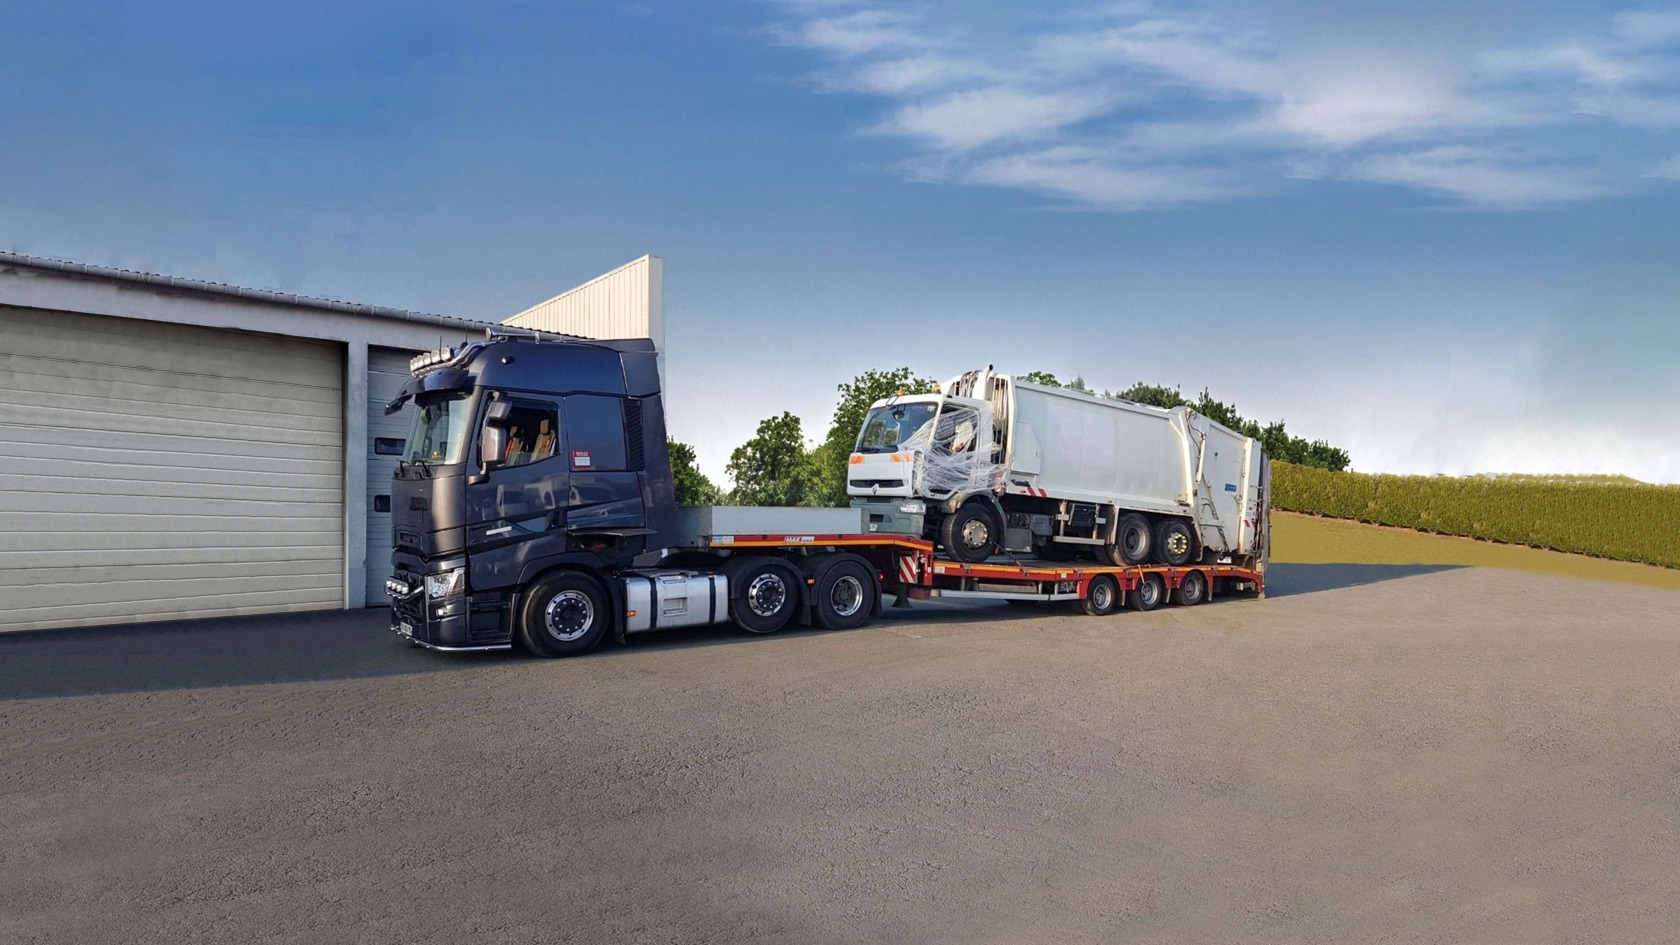 Breakdown service also possible with MAX Tailer trailers and semi-trailers